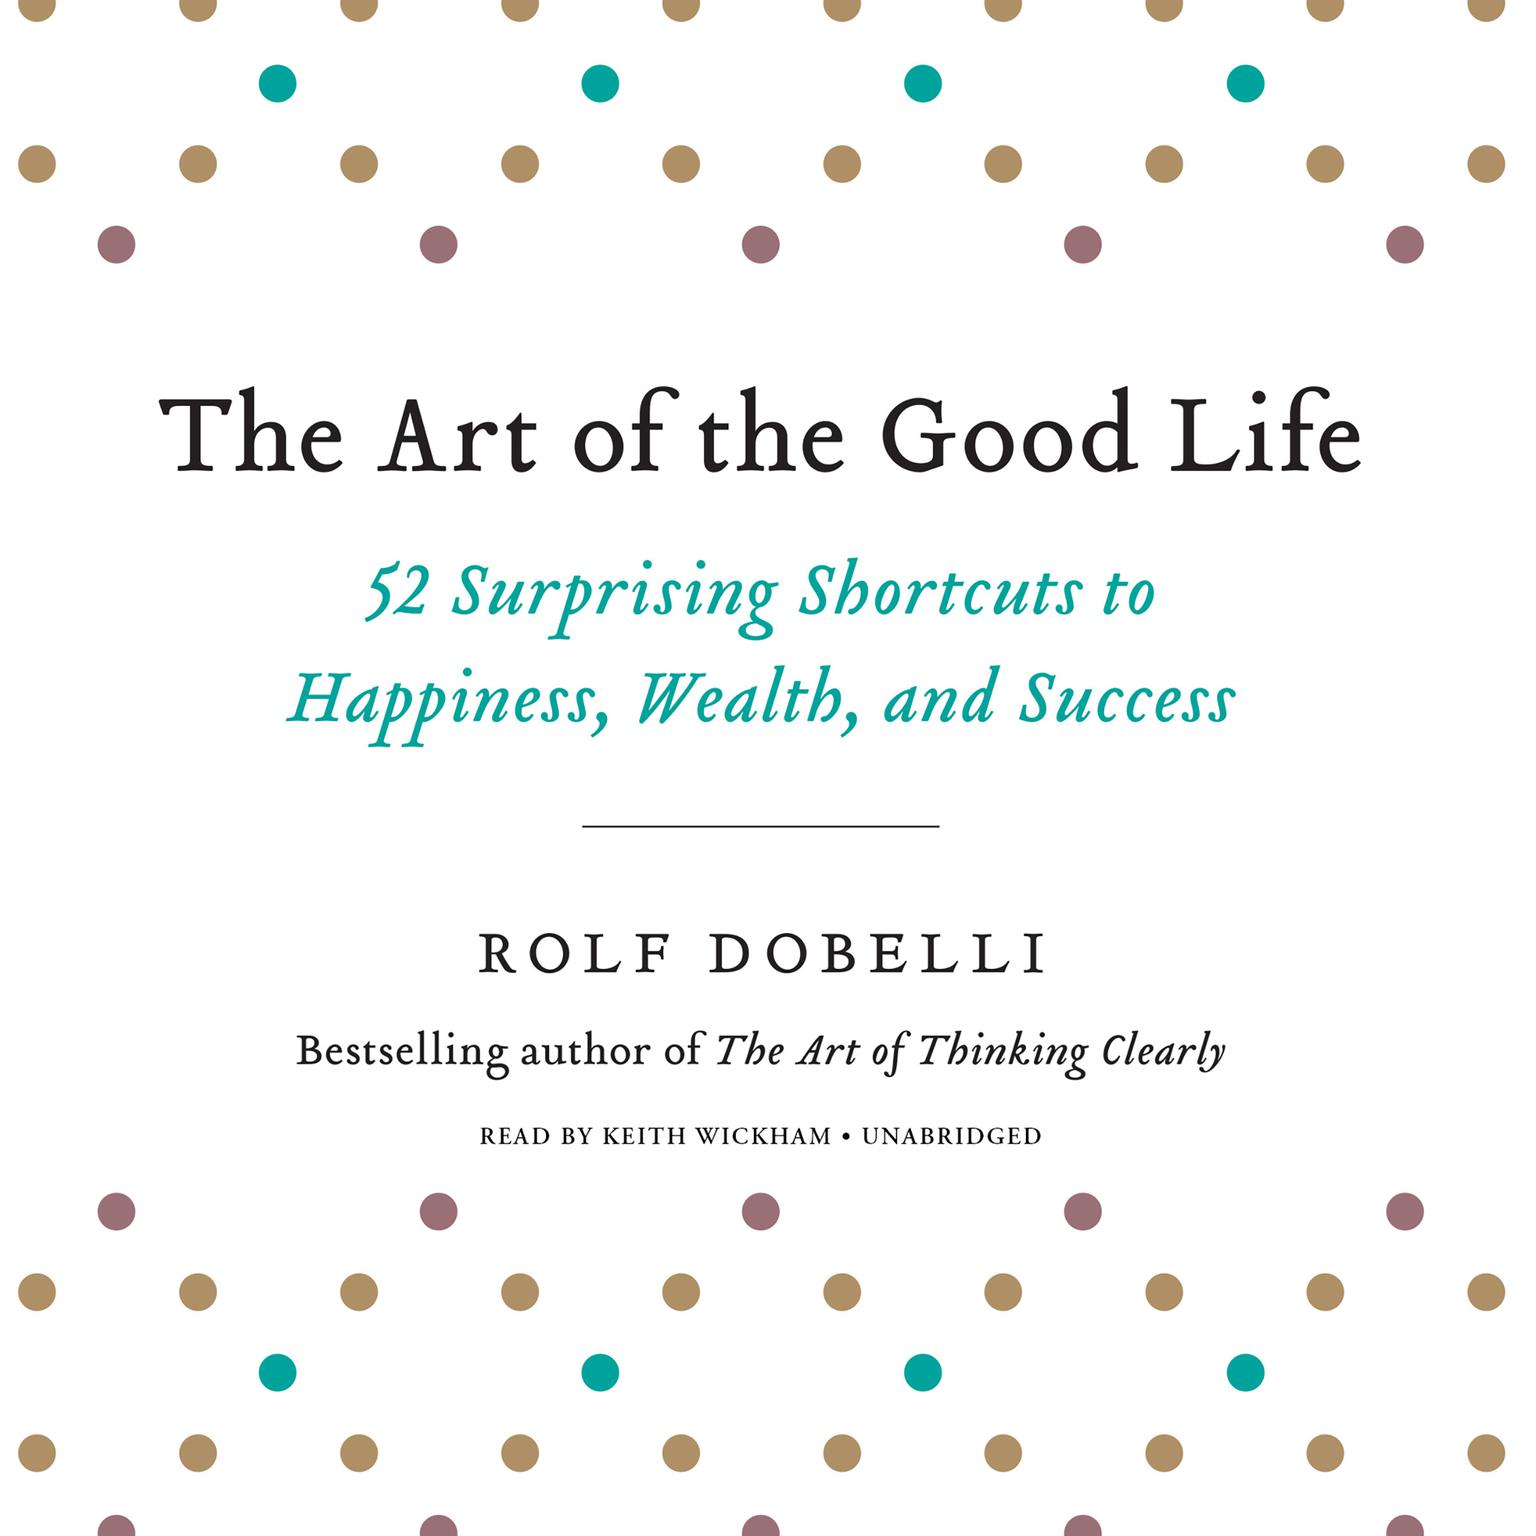 The Art of the Good Life: 52 Surprising Shortcuts to Happiness, Wealth, and Success Audiobook, by Rolf Dobelli